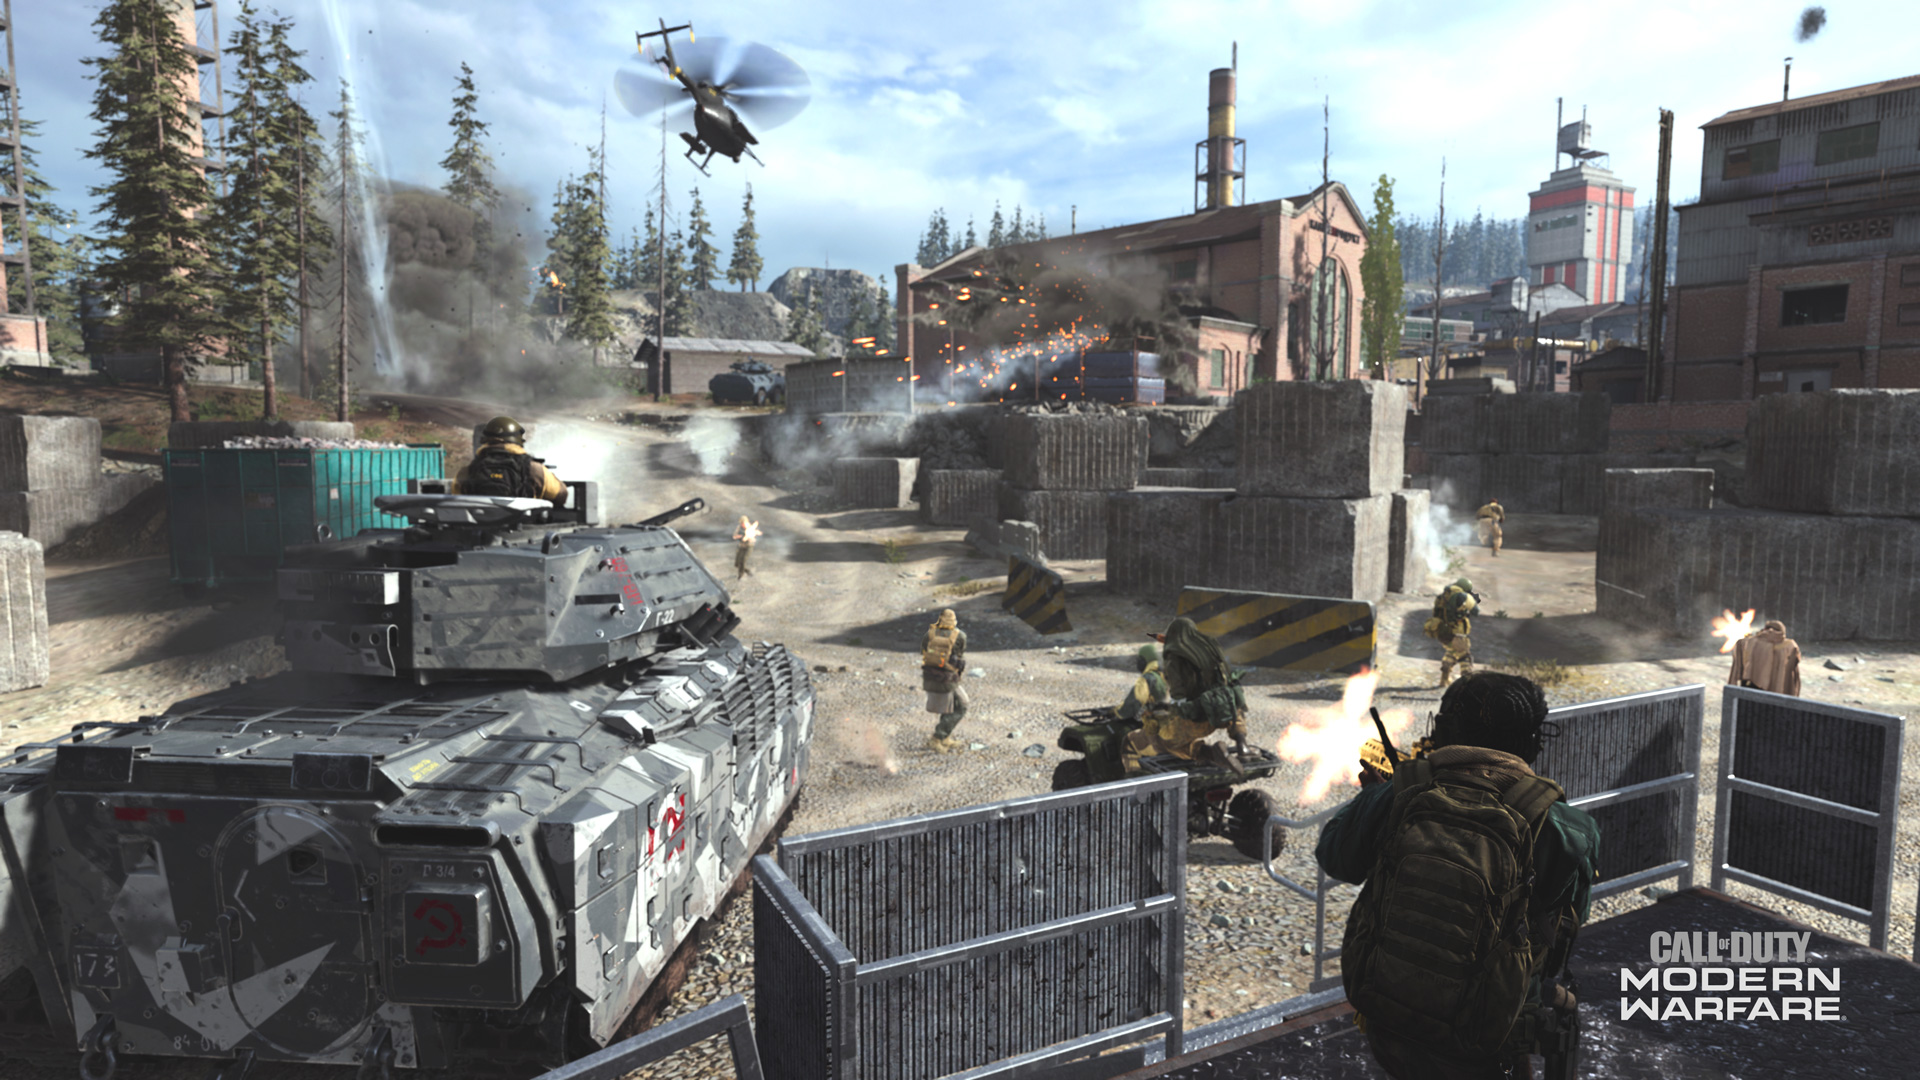 Planning to play Call of Duty: Modern Warfare 3 on PC? Check your specs!